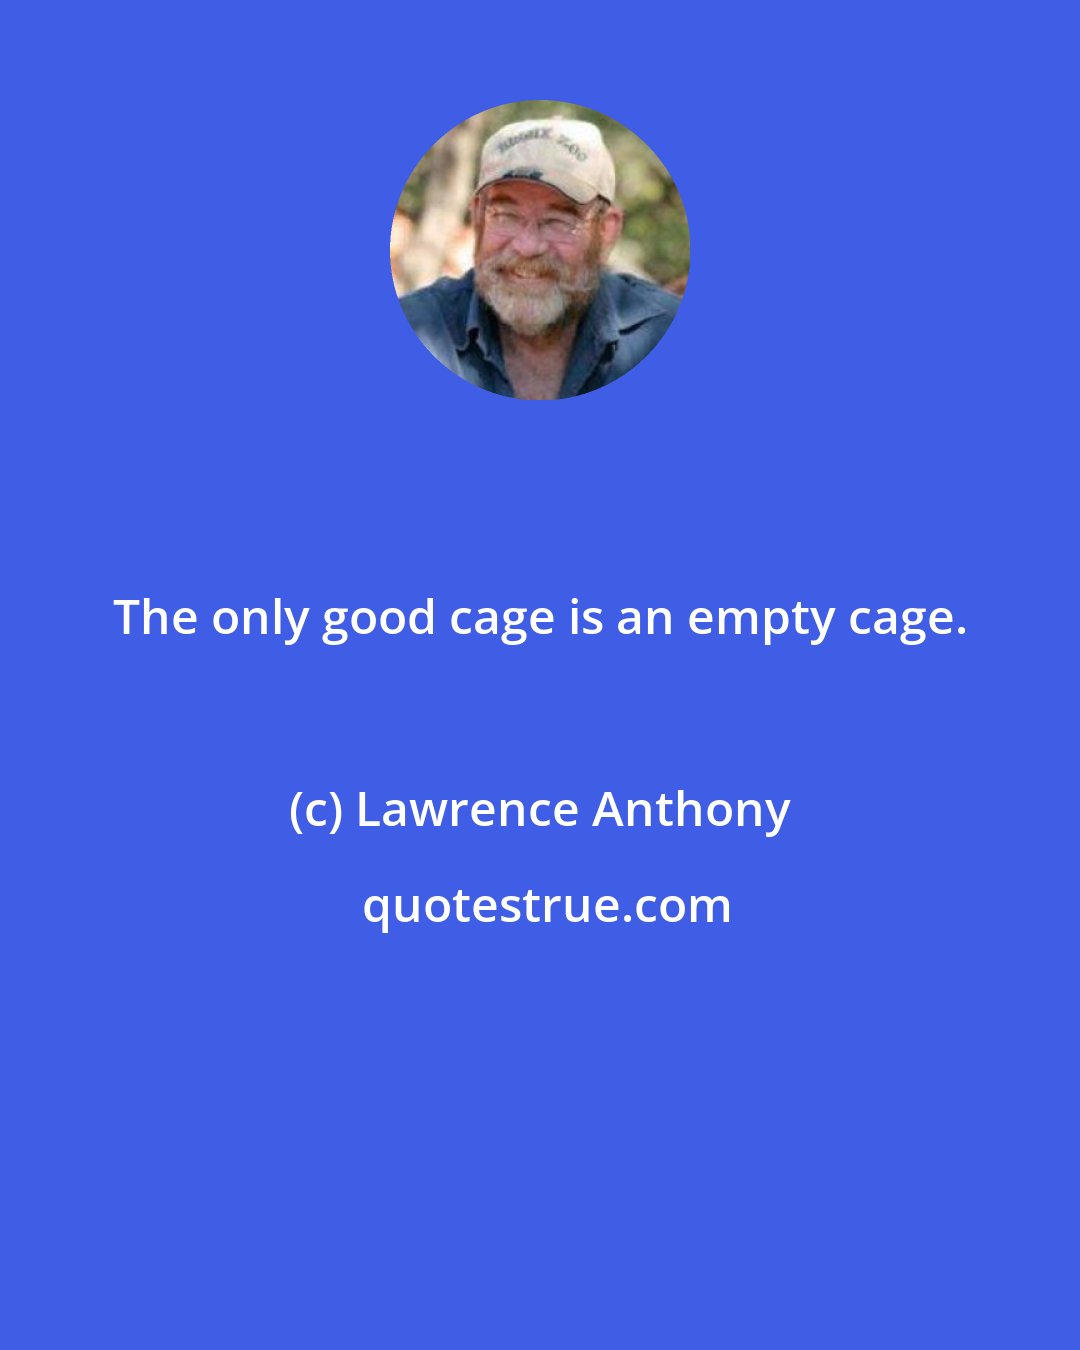 Lawrence Anthony: The only good cage is an empty cage.